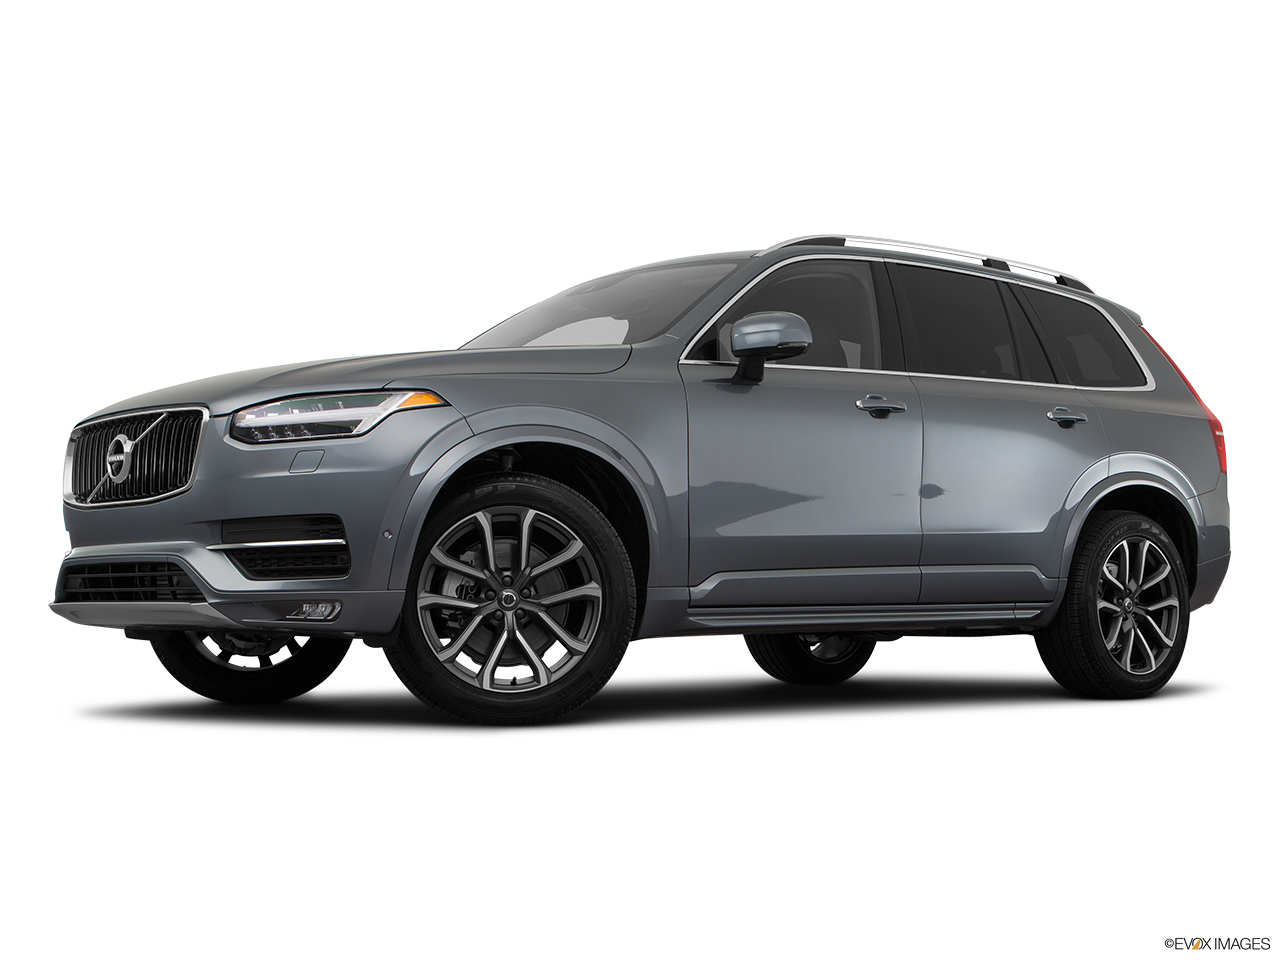 2018 Volvo XC90 T6 Momentum Low/wide front 5/8. 